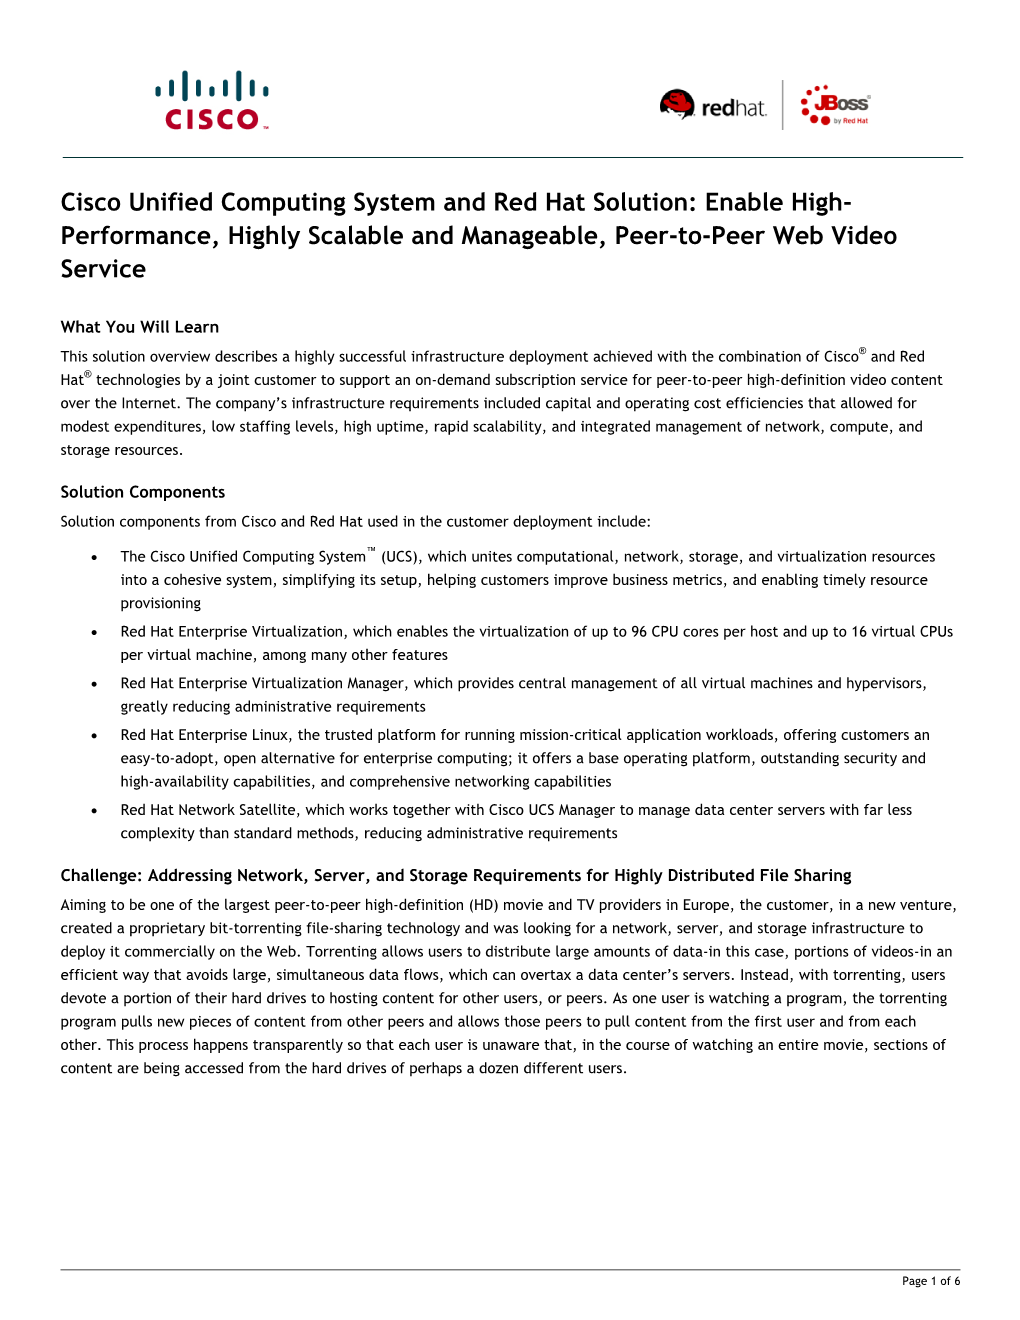 Cisco Unified Computing System and Red Hat Solution: Enable High- Performance, Highly Scalable and Manageable, Peer-To-Peer Web Video Service